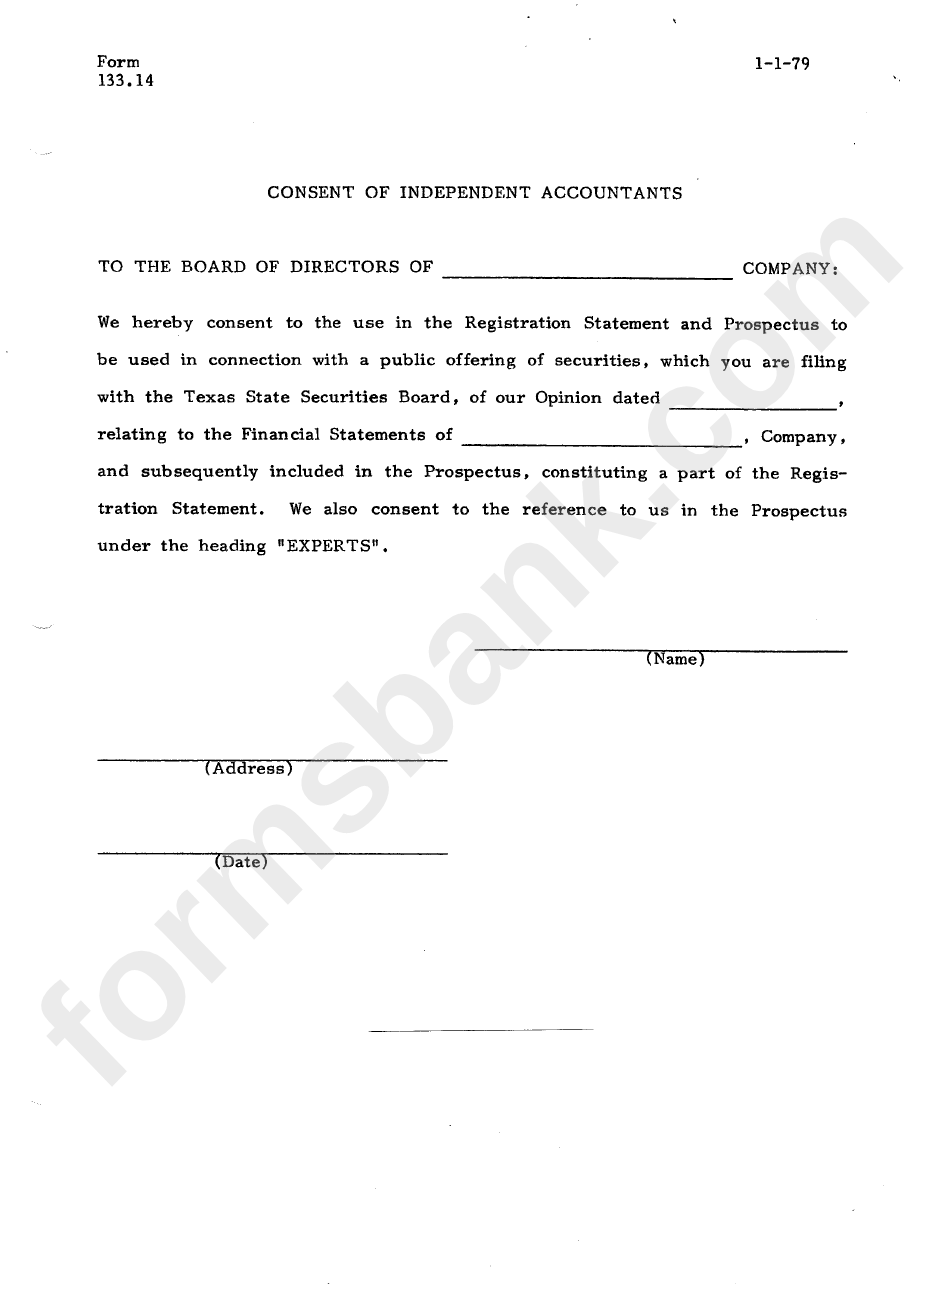 Form 133.14 - Consent Of Independent Accountants - 1979